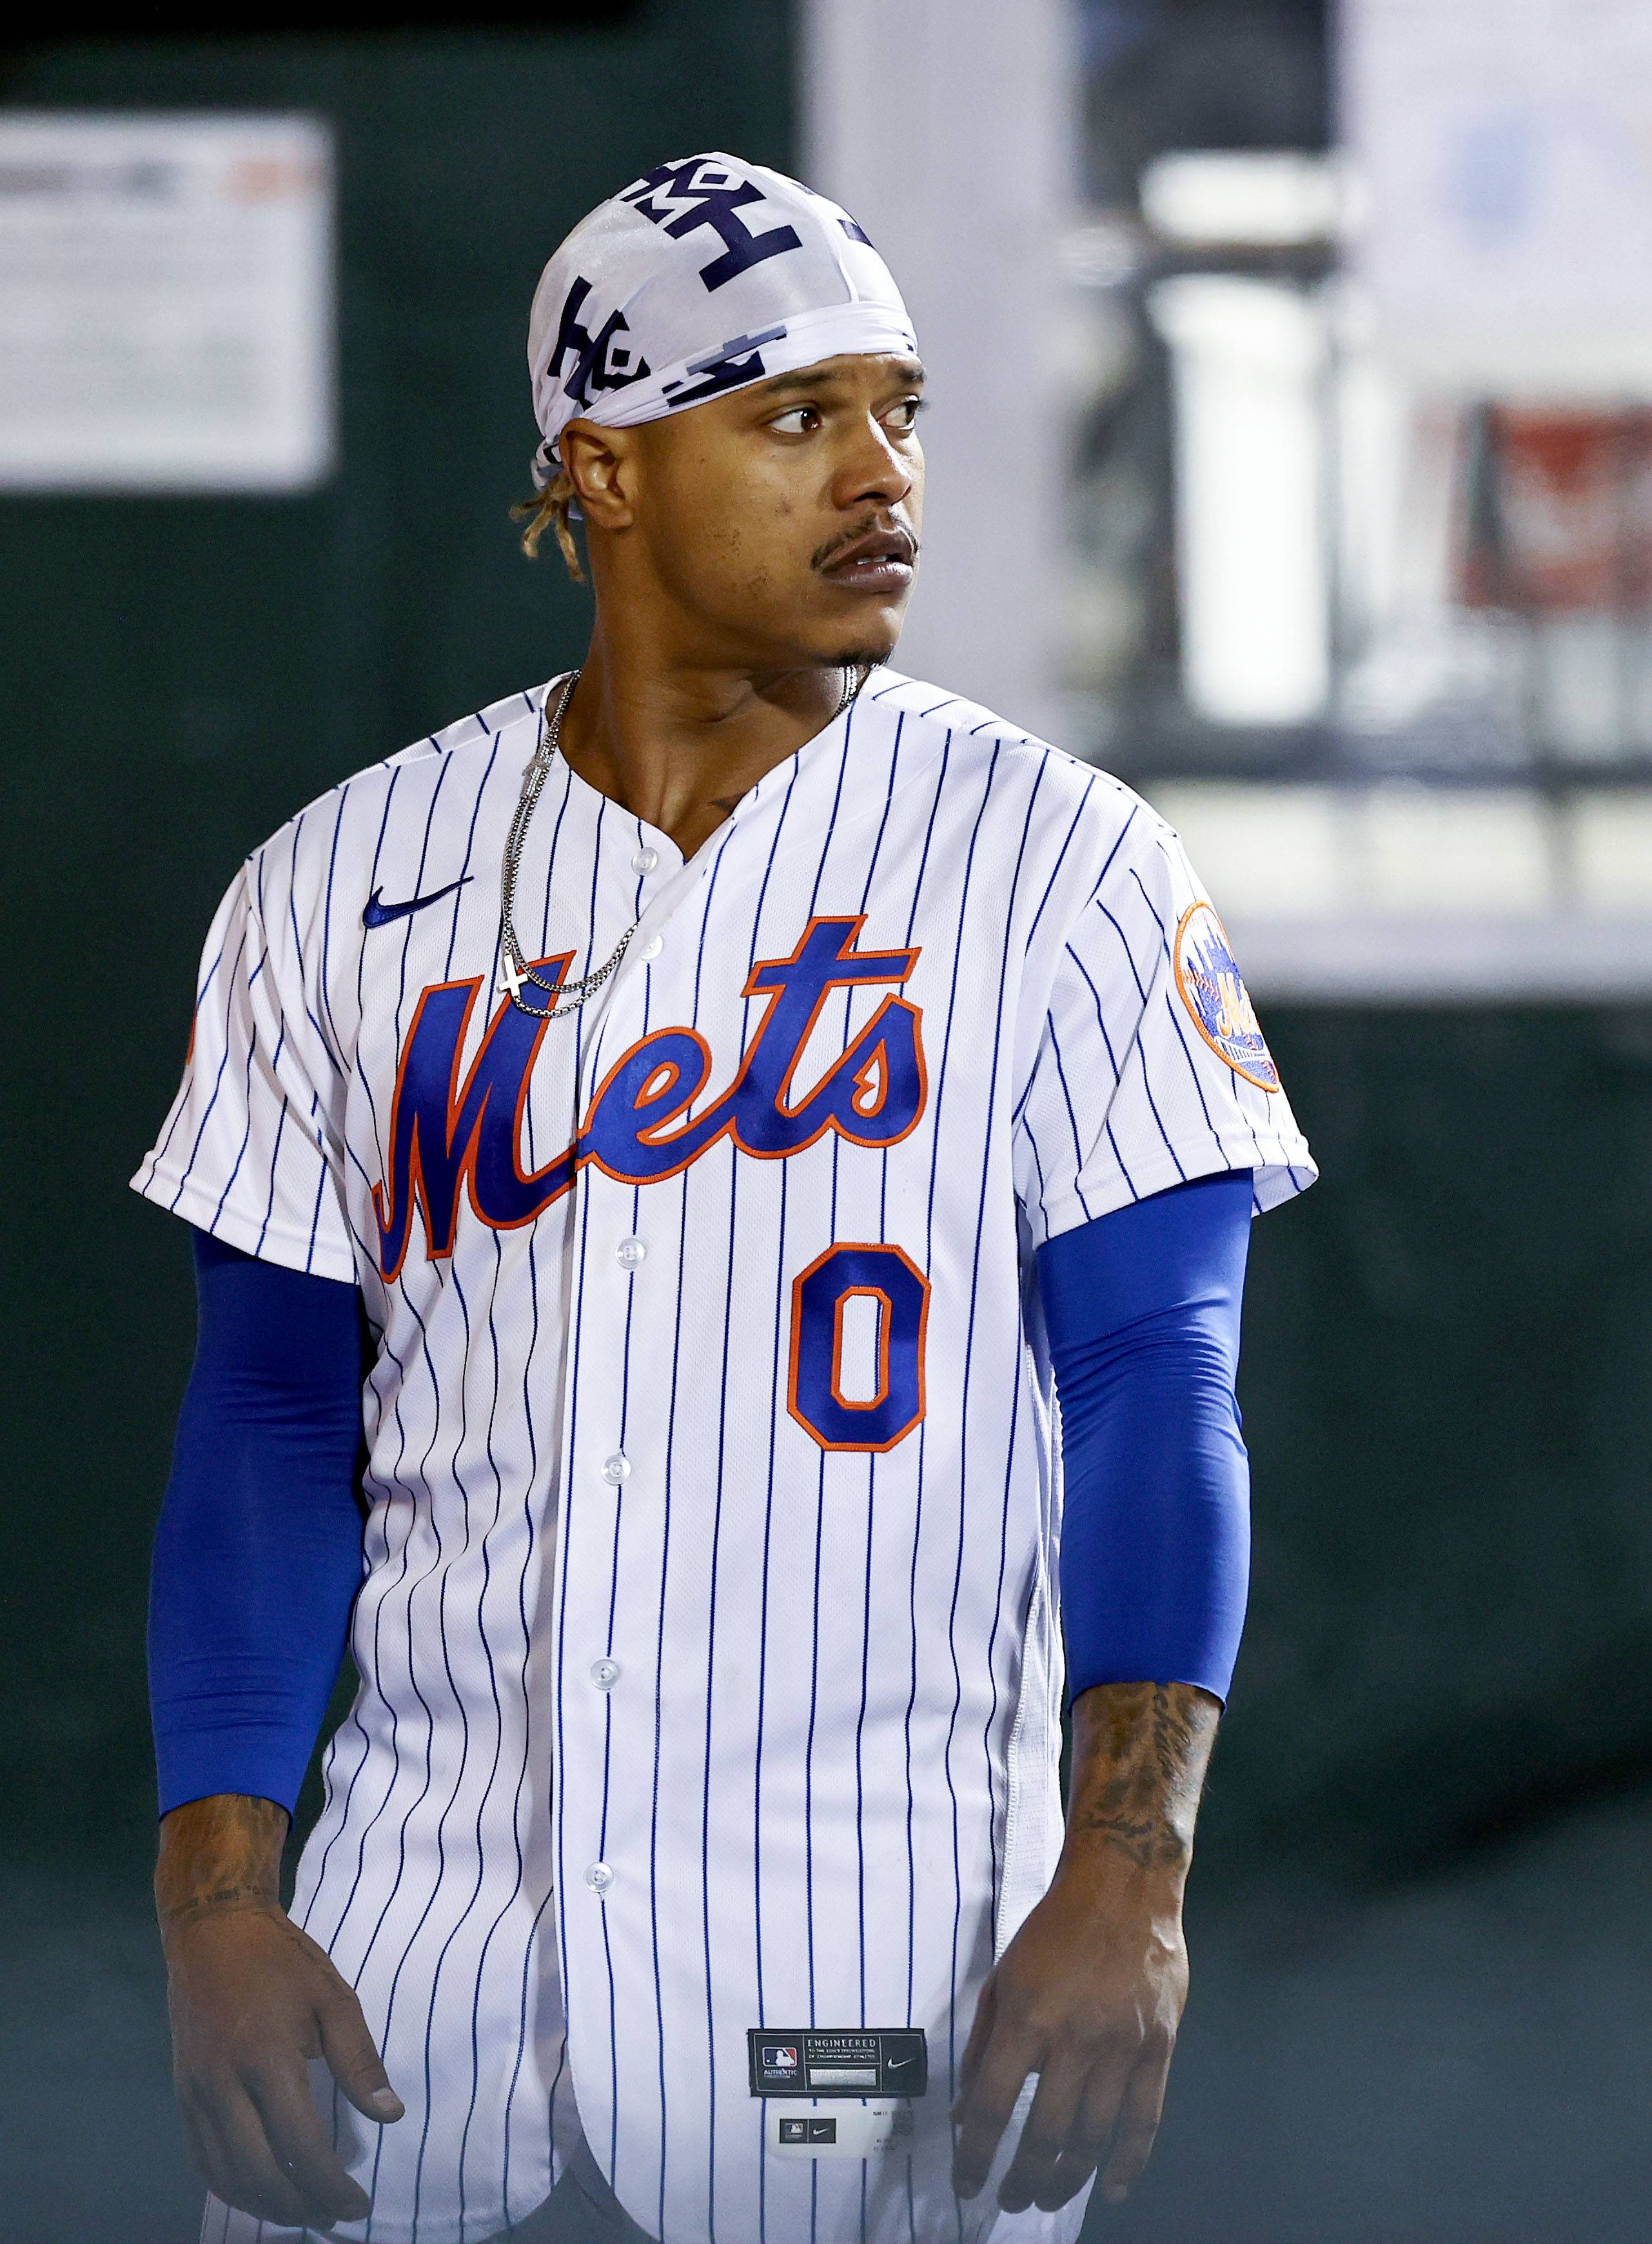 Announcer Under Fire After Commenting On Mets Pitcher's Durag